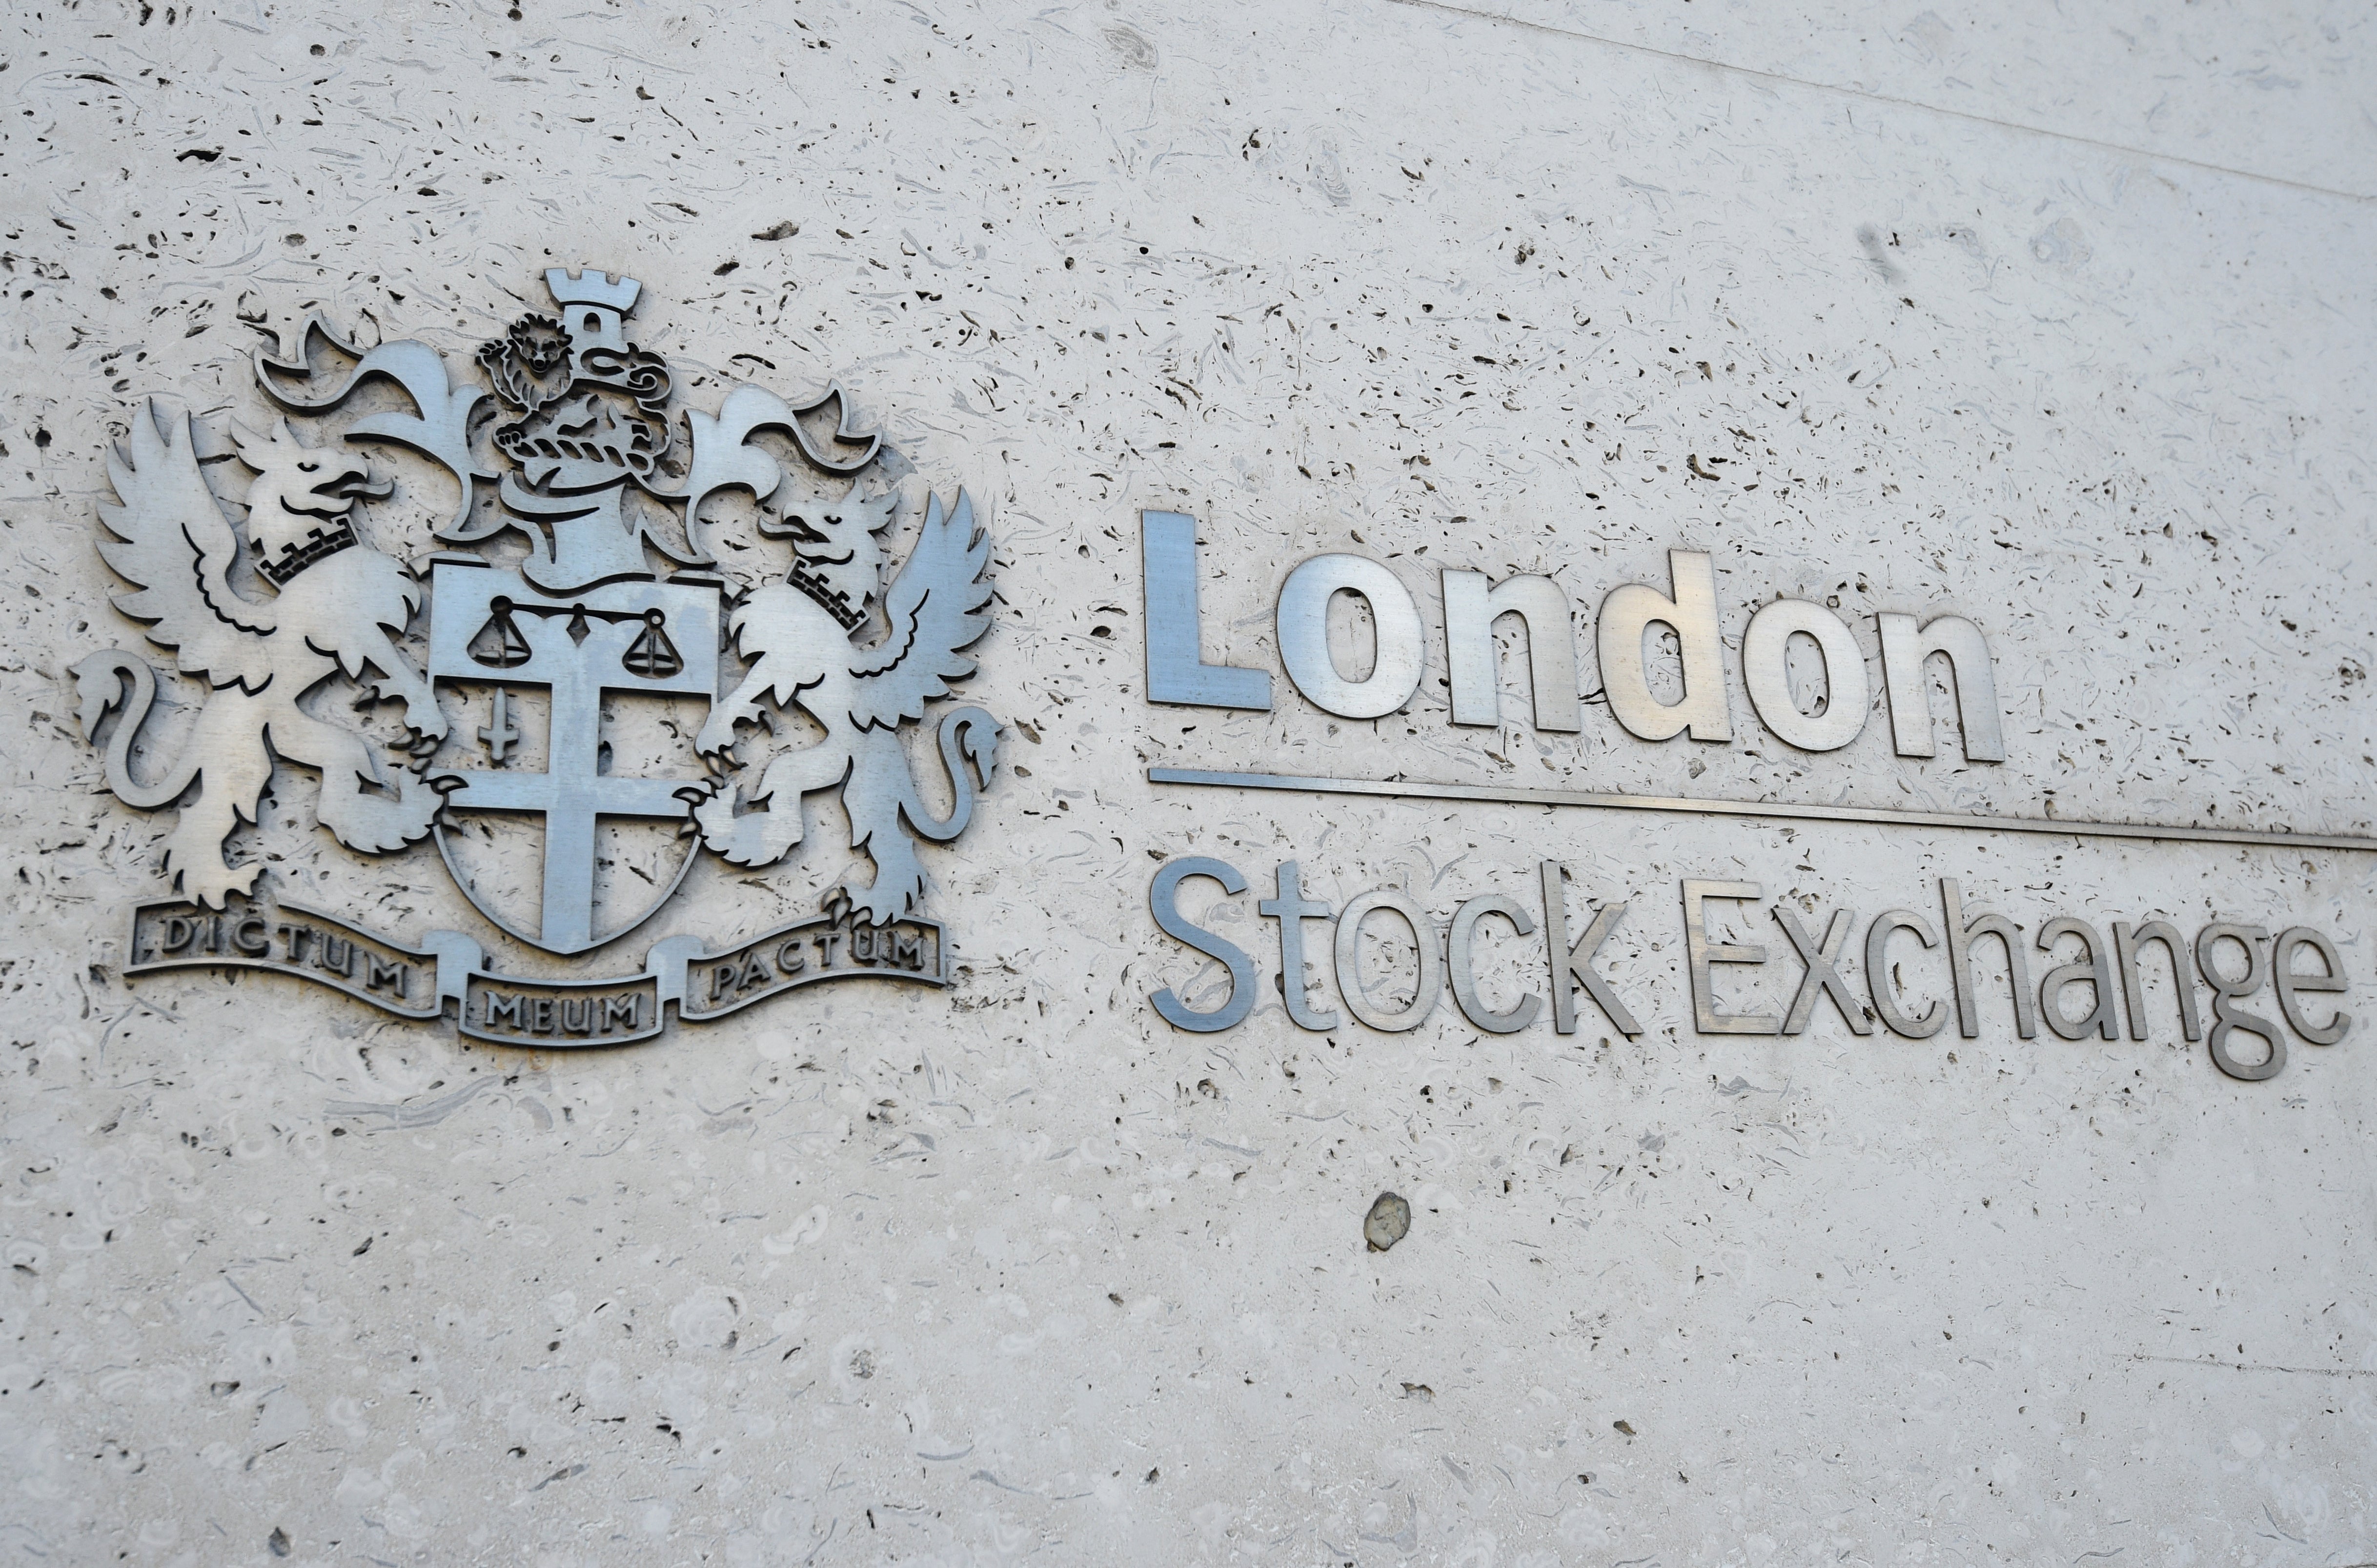 London stocks recovered some losses from Friday as major indices advance